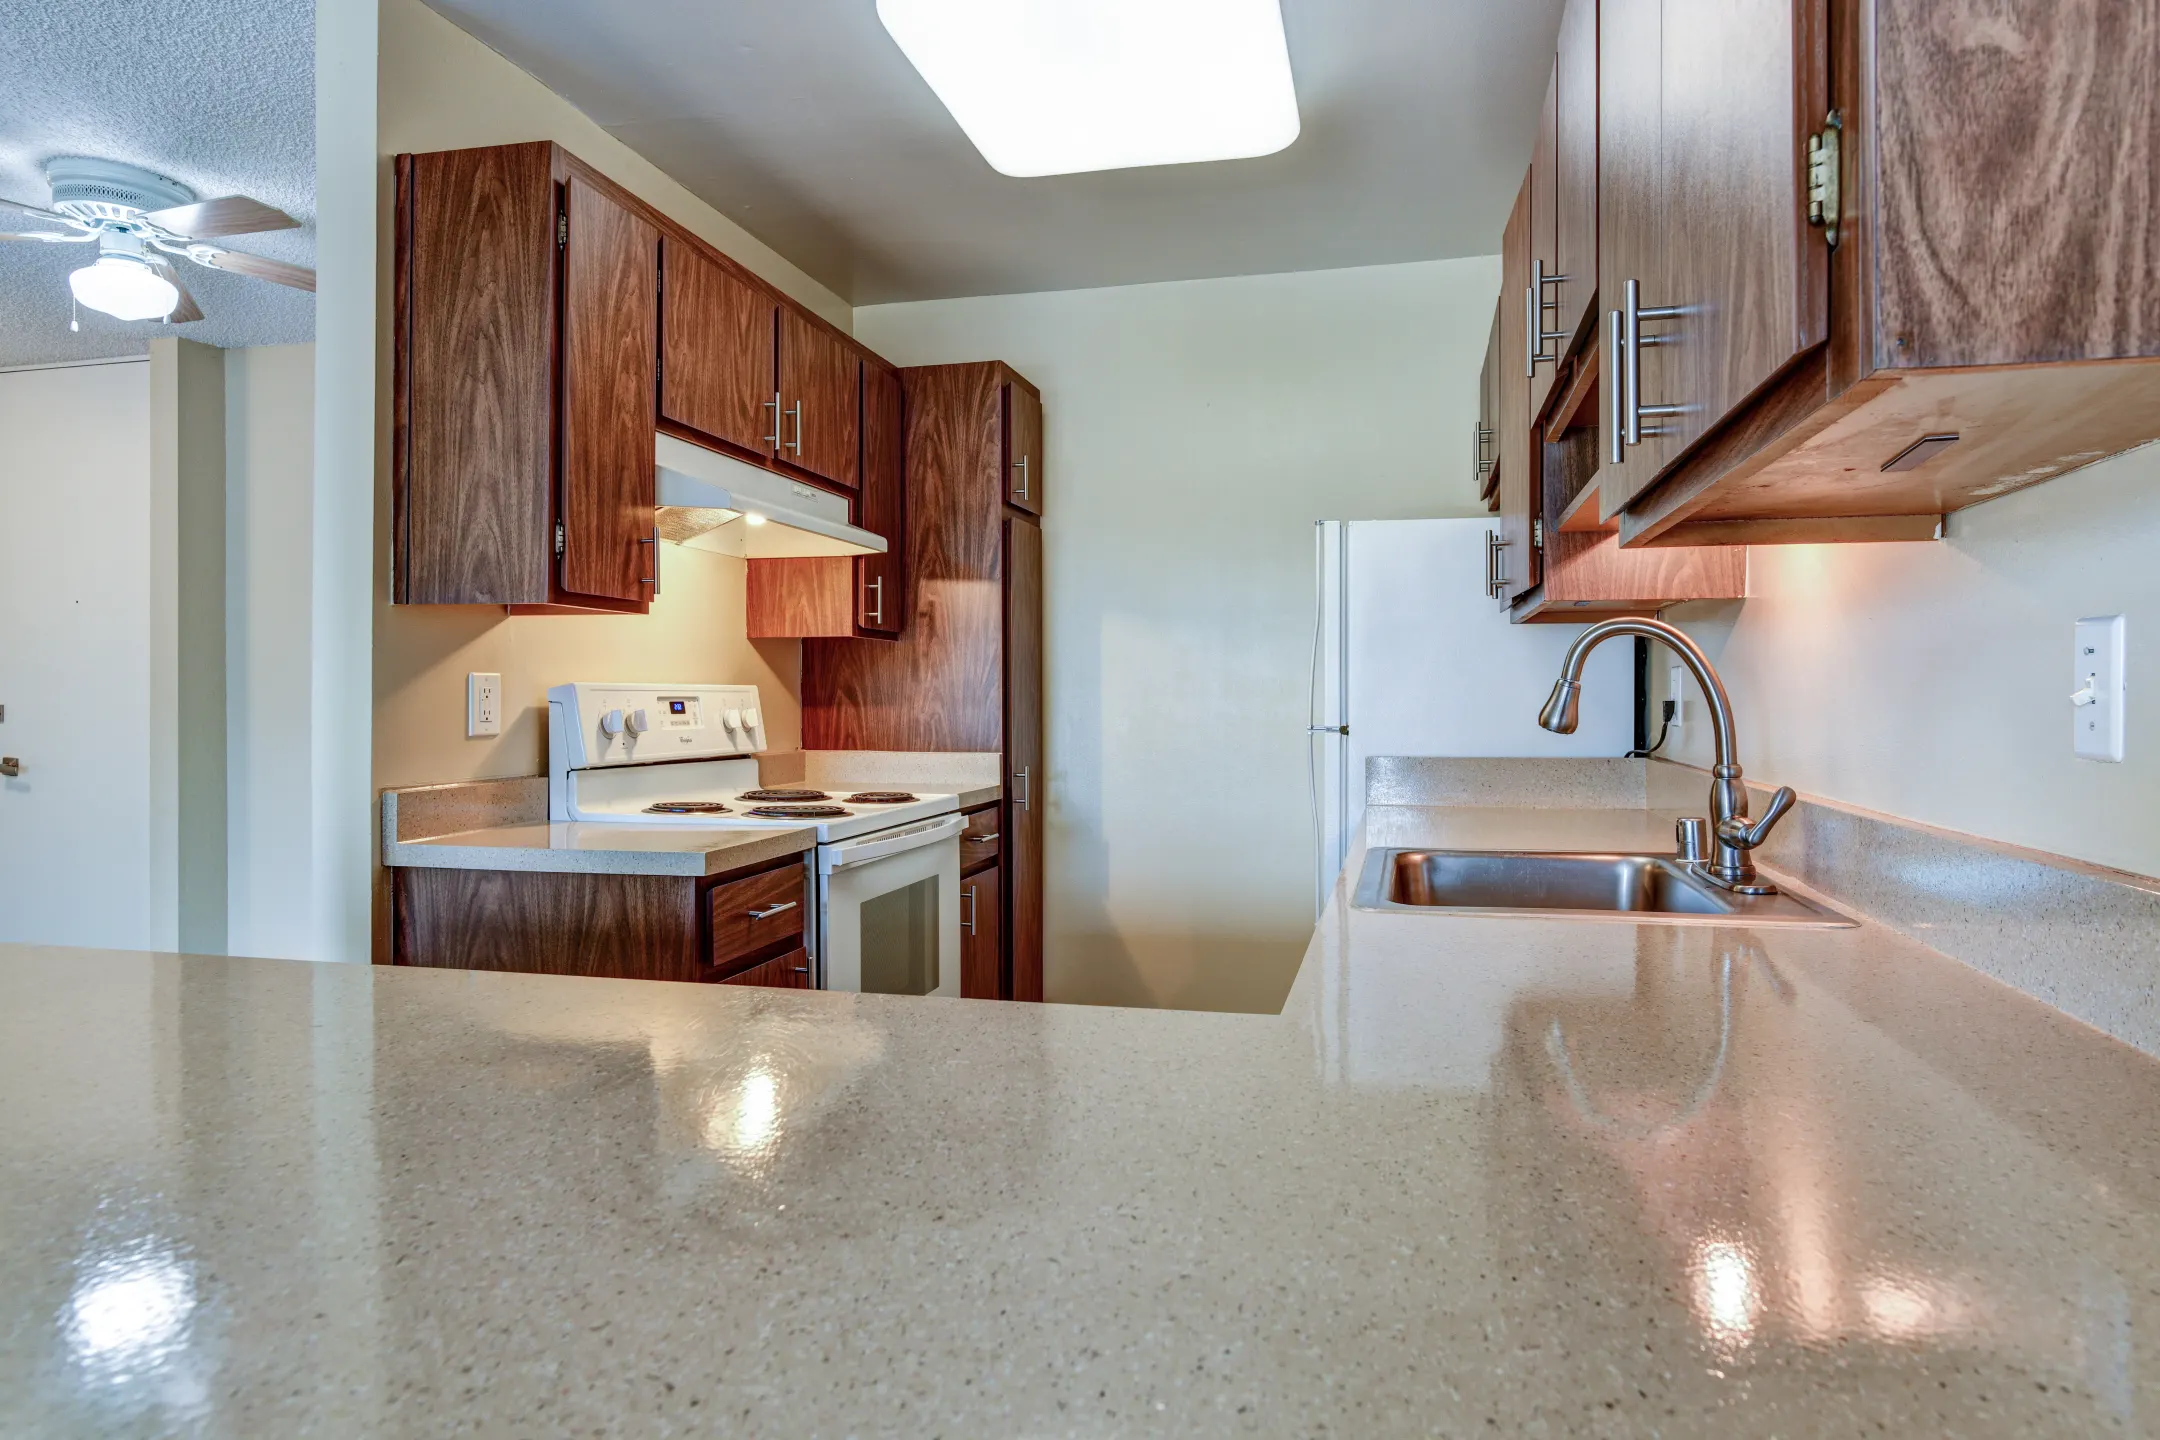 Kitchen - Tradewinds Apartments - Foster City, CA